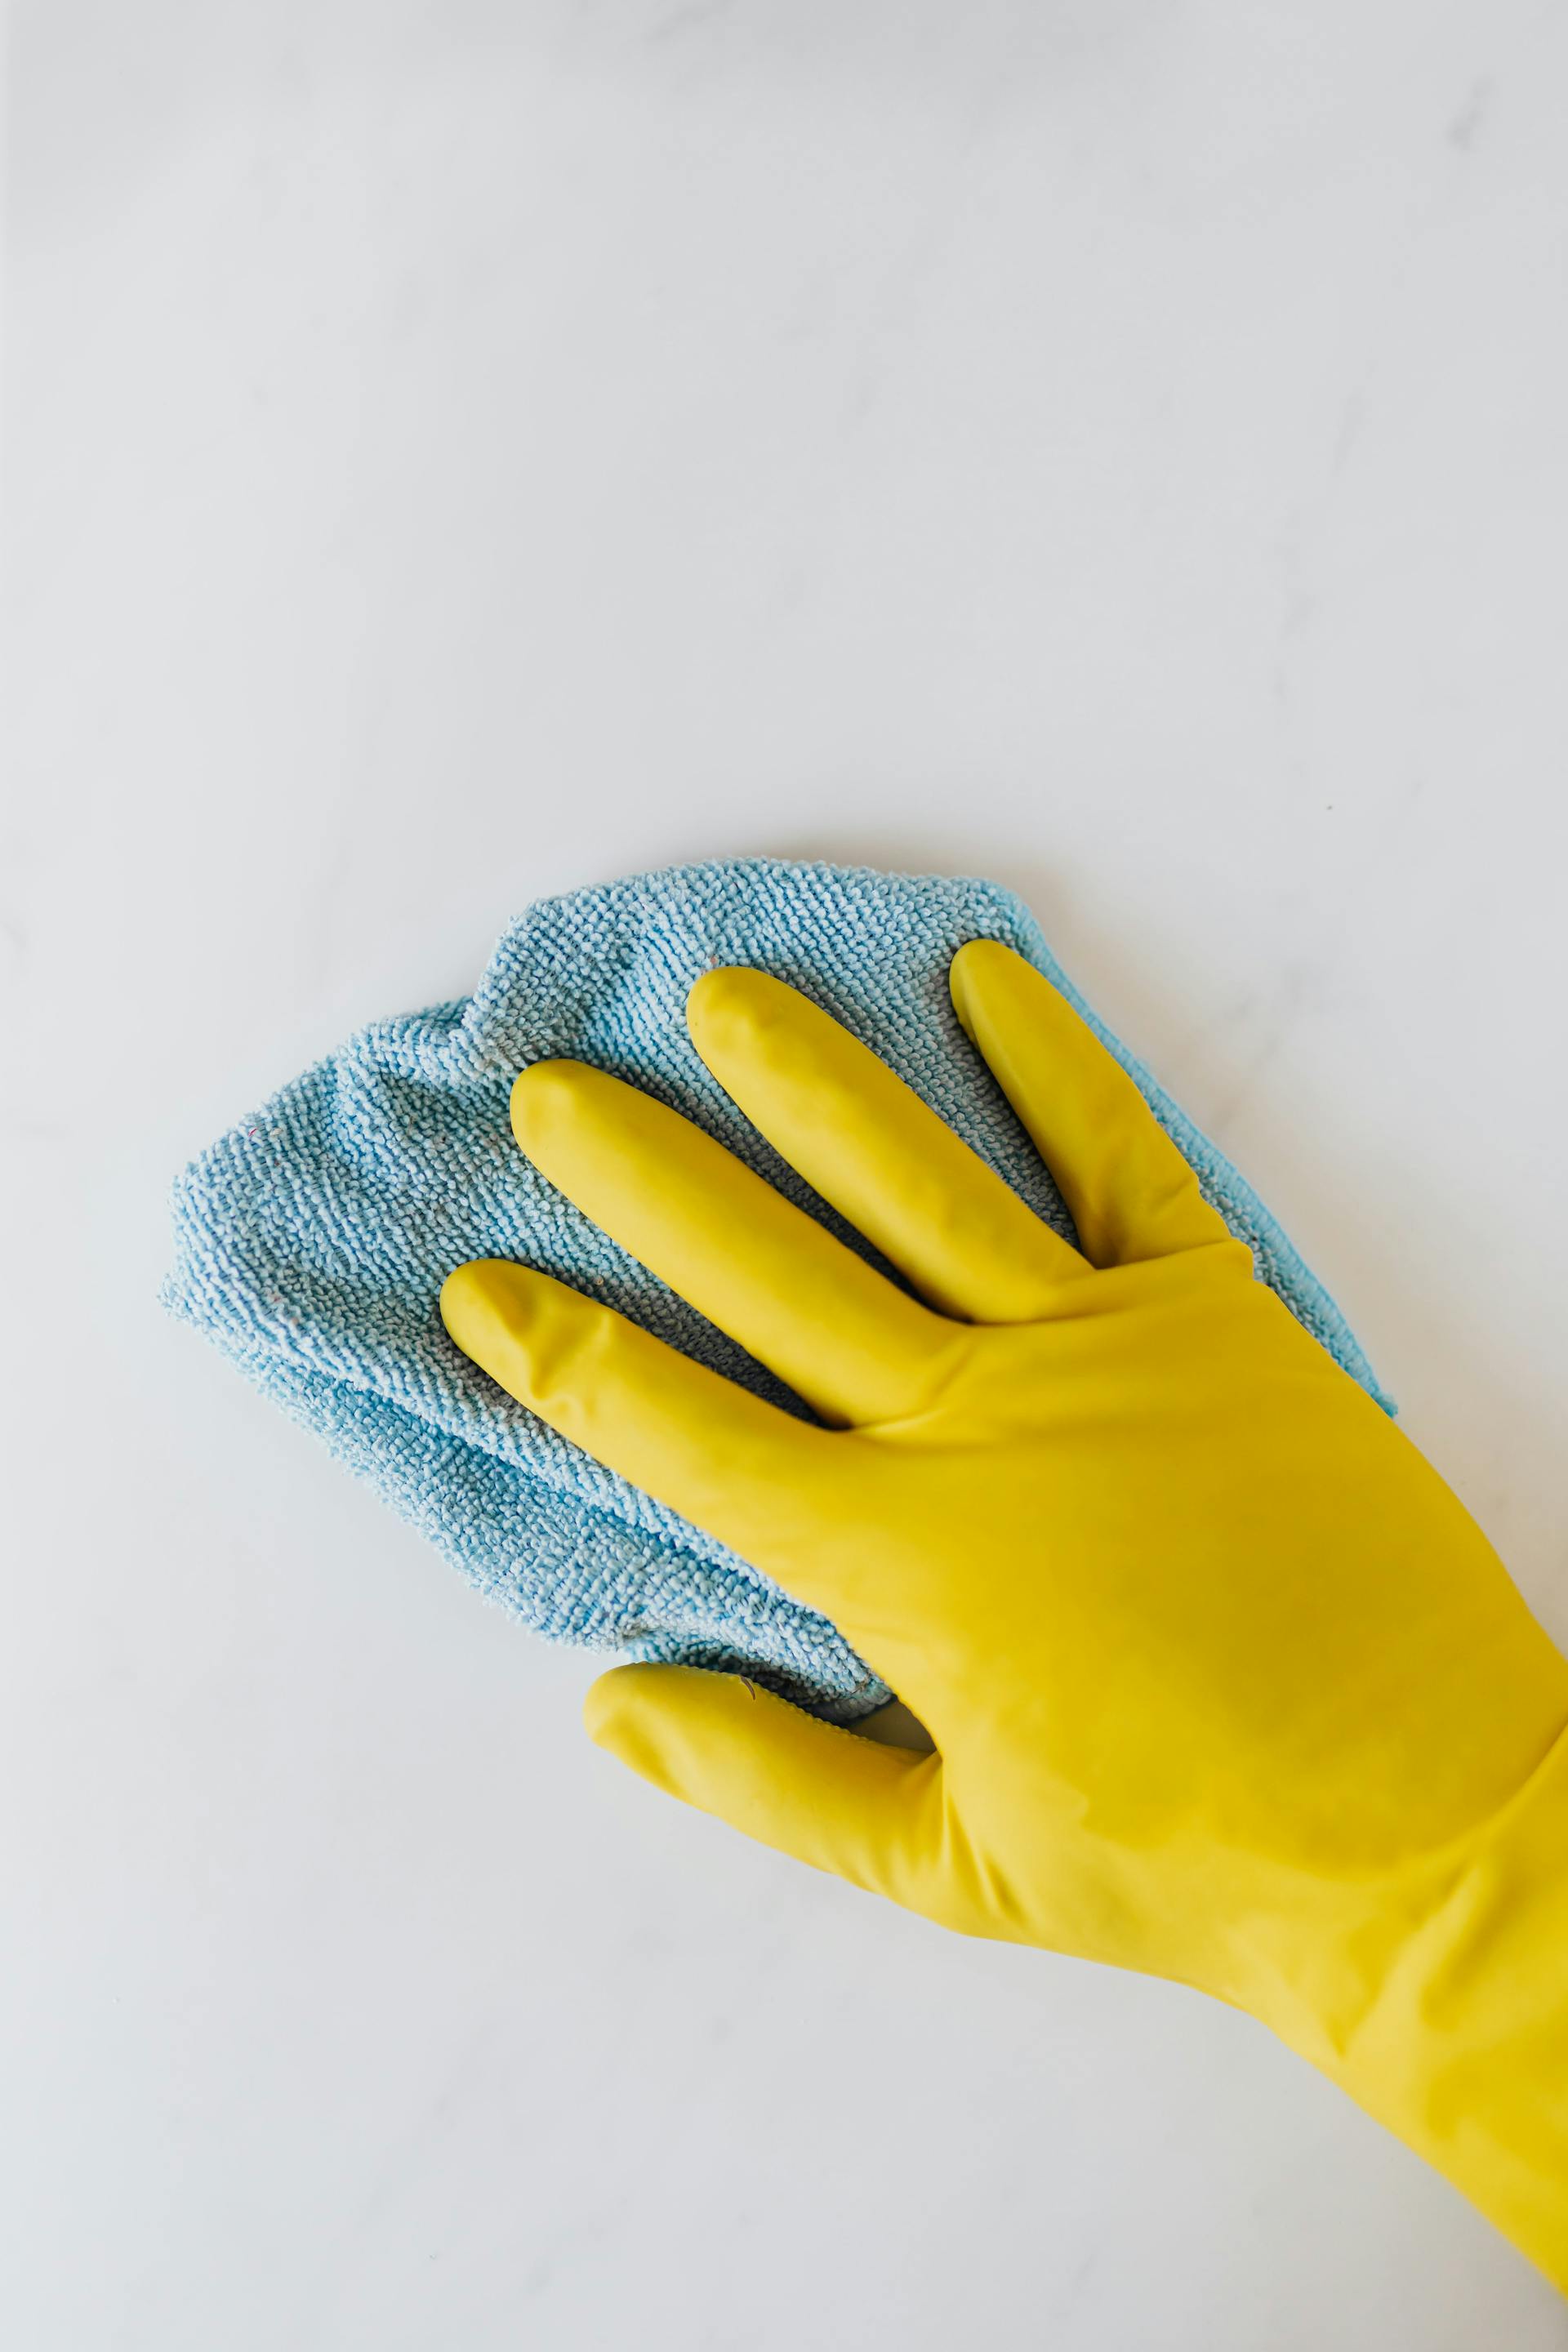 crop-unrecognizable-person-in-yellow-gloves-cleaning-white-surface